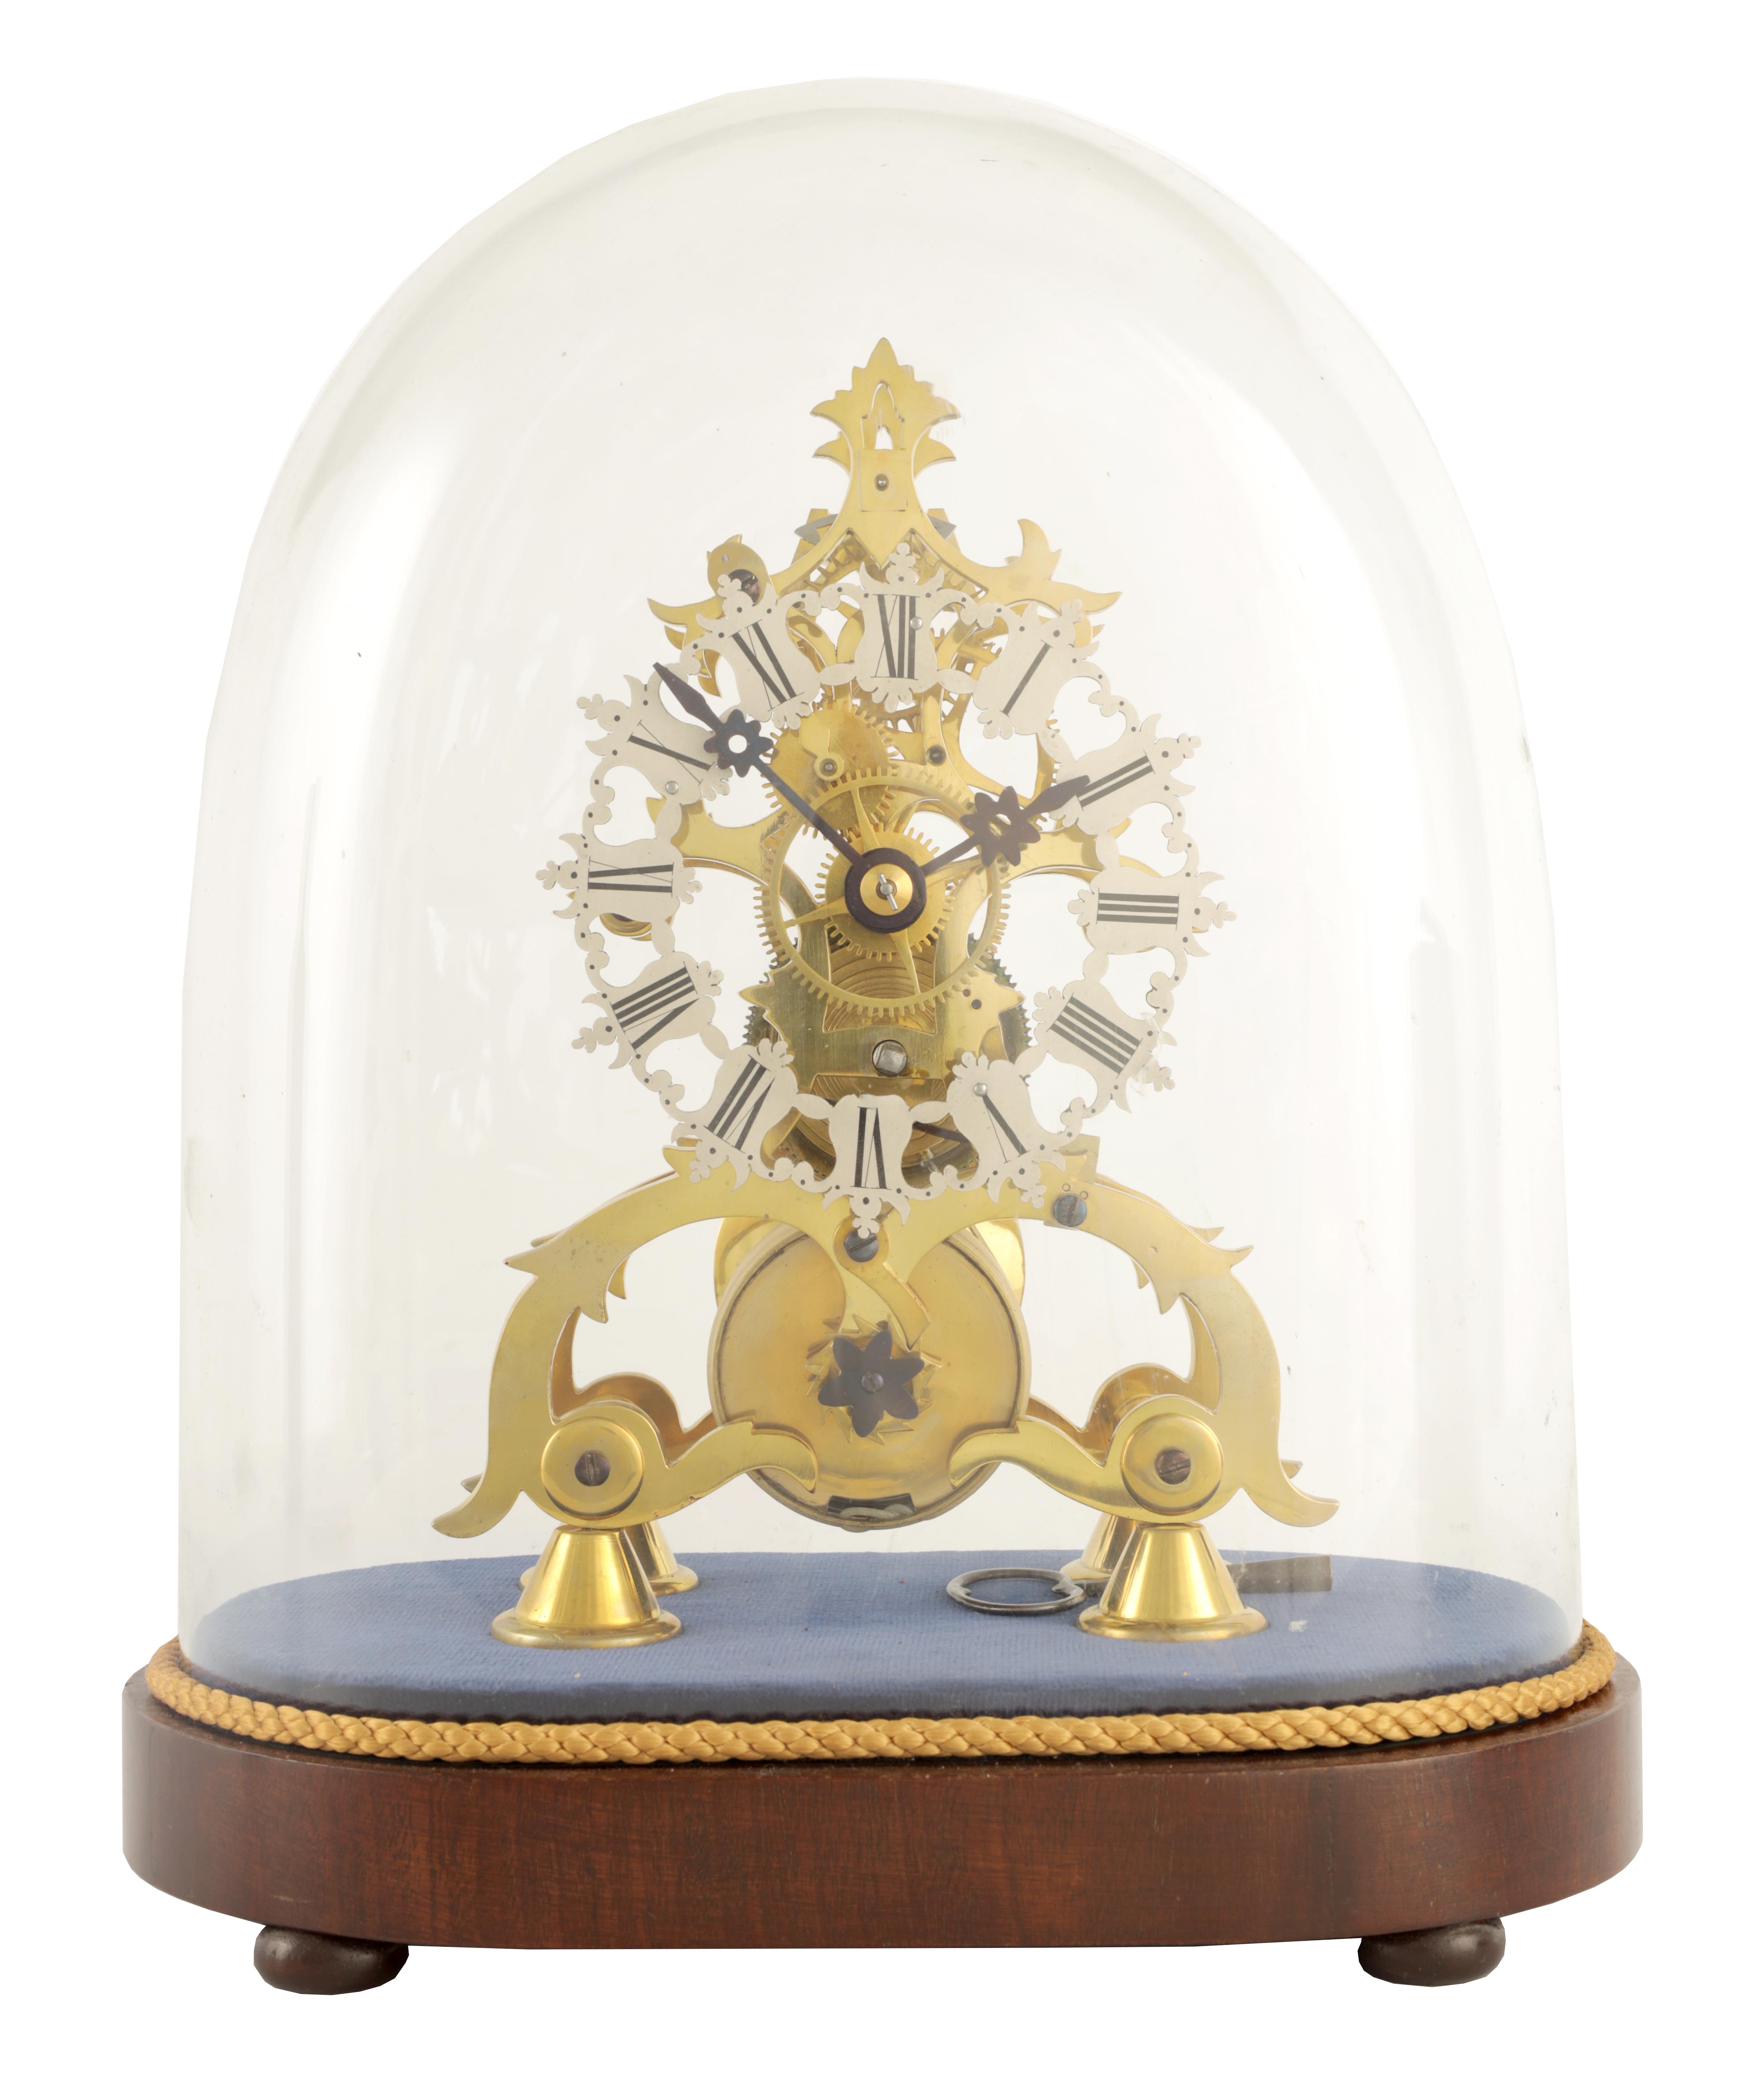 A 19TH CENTURY 8-DAY FUSEE TIMEPIECE SKELETON CLOCK with pierced silvered chapter ring fronting a